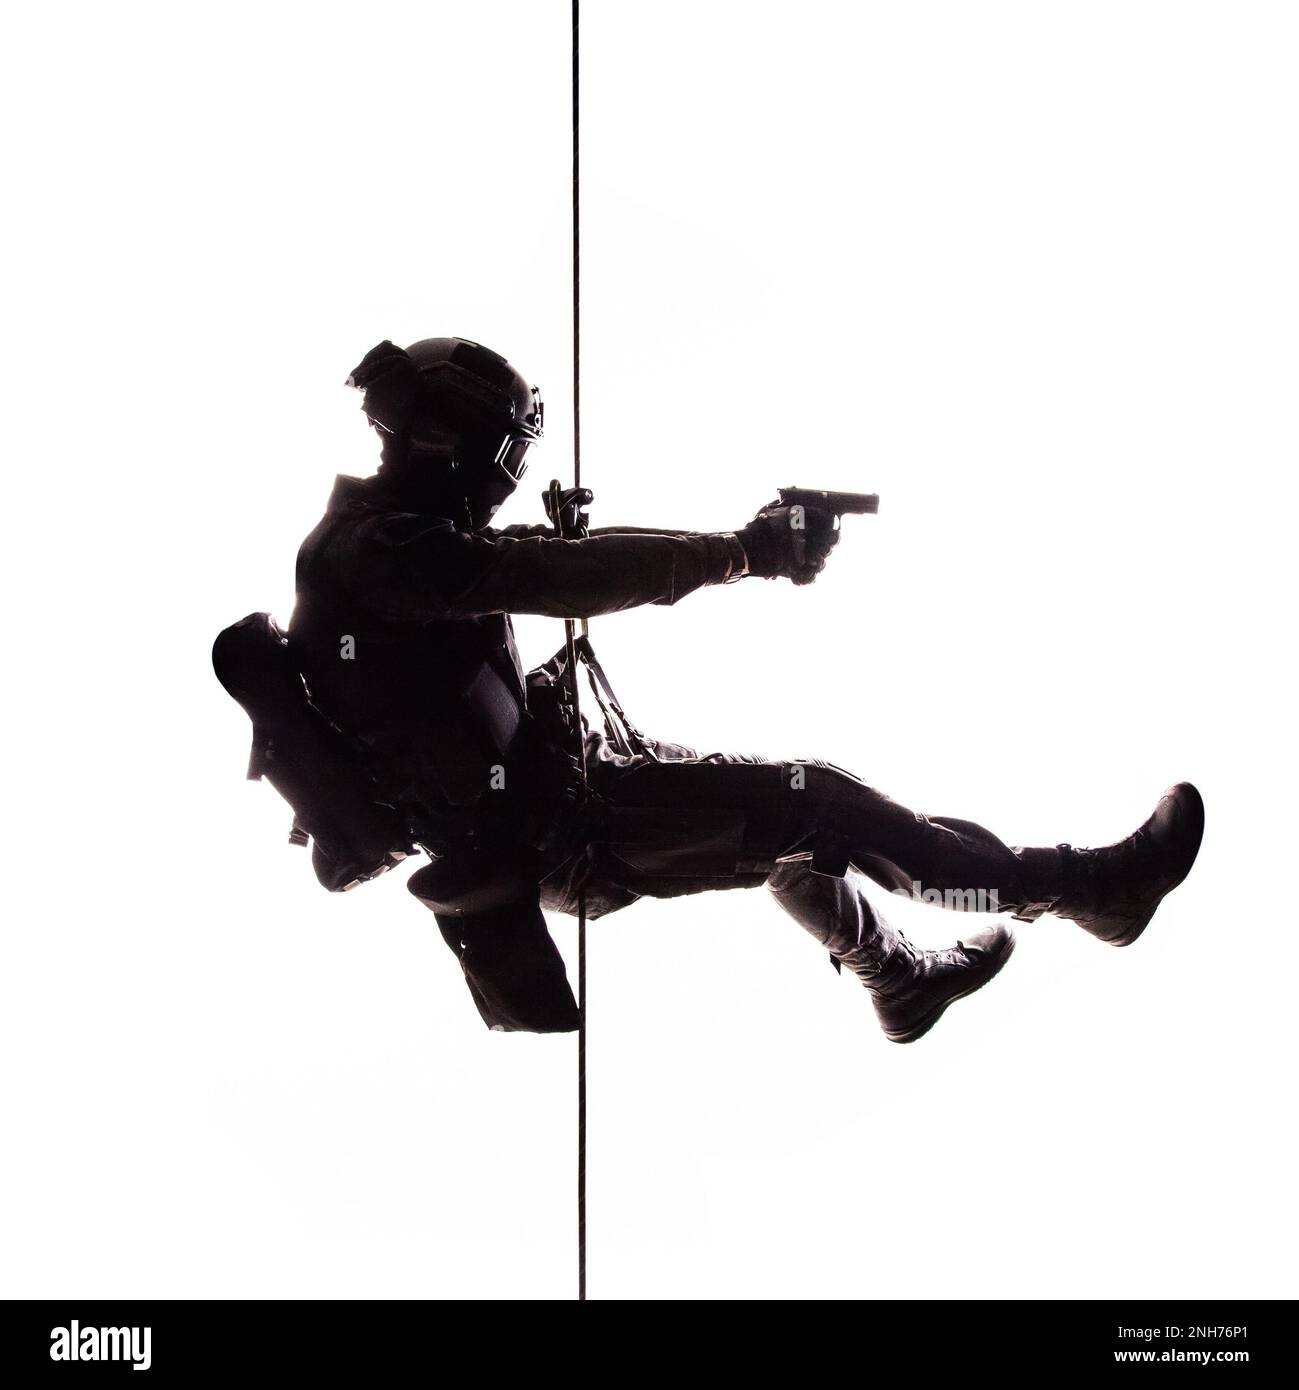 https://c8.alamy.com/comp/2NH76P1/silhouette-of-police-officer-in-tactical-gear-descending-from-a-height-rope-exercises-with-weapons-tactical-rappelling-anti-terror-or-counter-terrorism-operation-in-darkness-in-rappelling-harness-white-background-2NH76P1.jpg